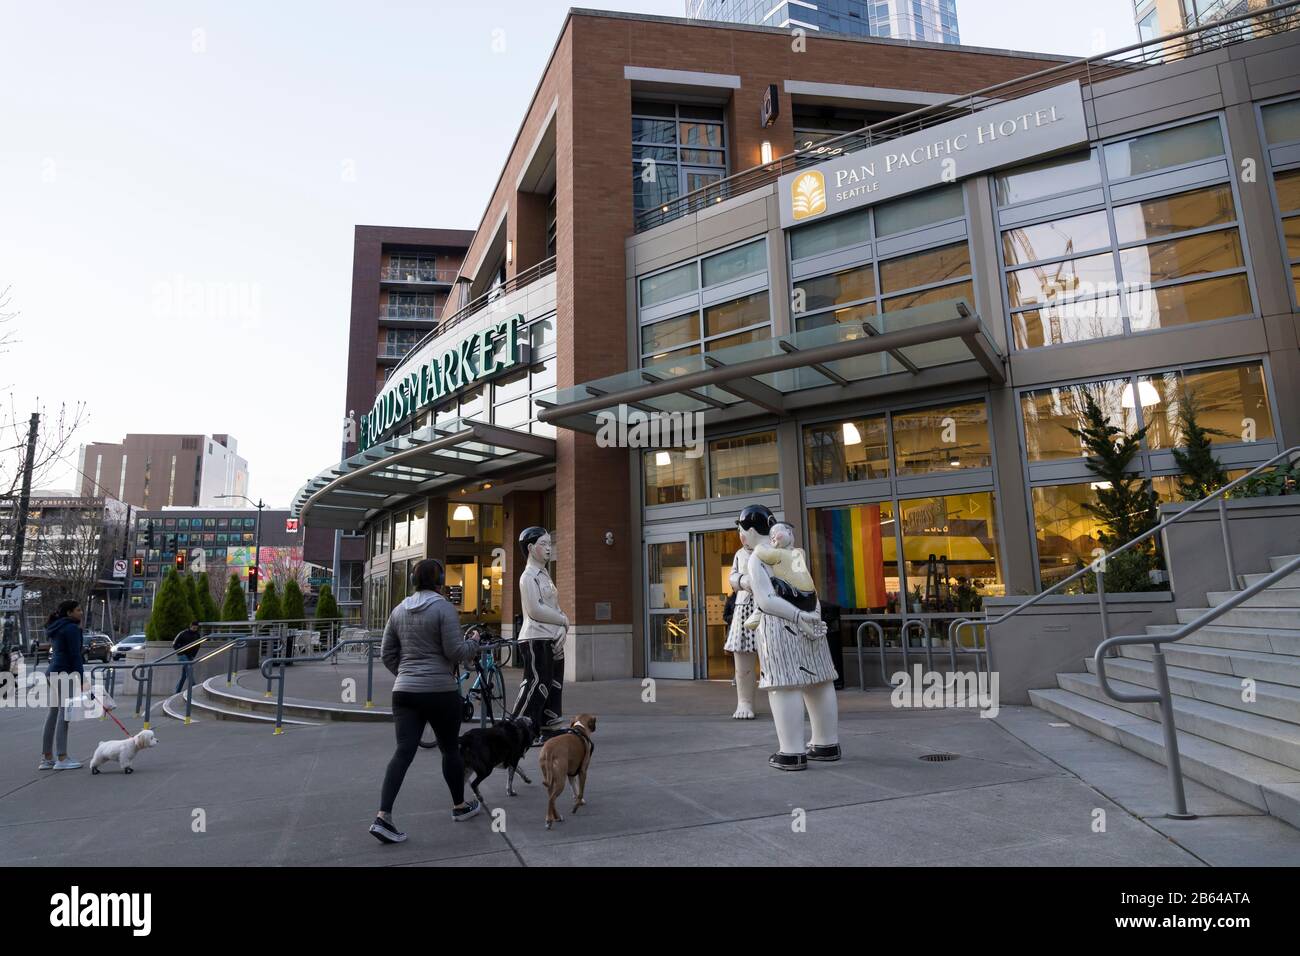 Whole Foods Market in Seattle’s Belltown neighborhood is quiet on March 9, 2020. Transit ridership, pedestrian and car traffic is much lighter than usual in the city due to sweeping recommendations for people to stay home to slow the spread of coronavirus. Keystone employers in the region including Facebook and Amazon and many others have told their employees to telecommute rather than go in to work when possible. Stock Photo